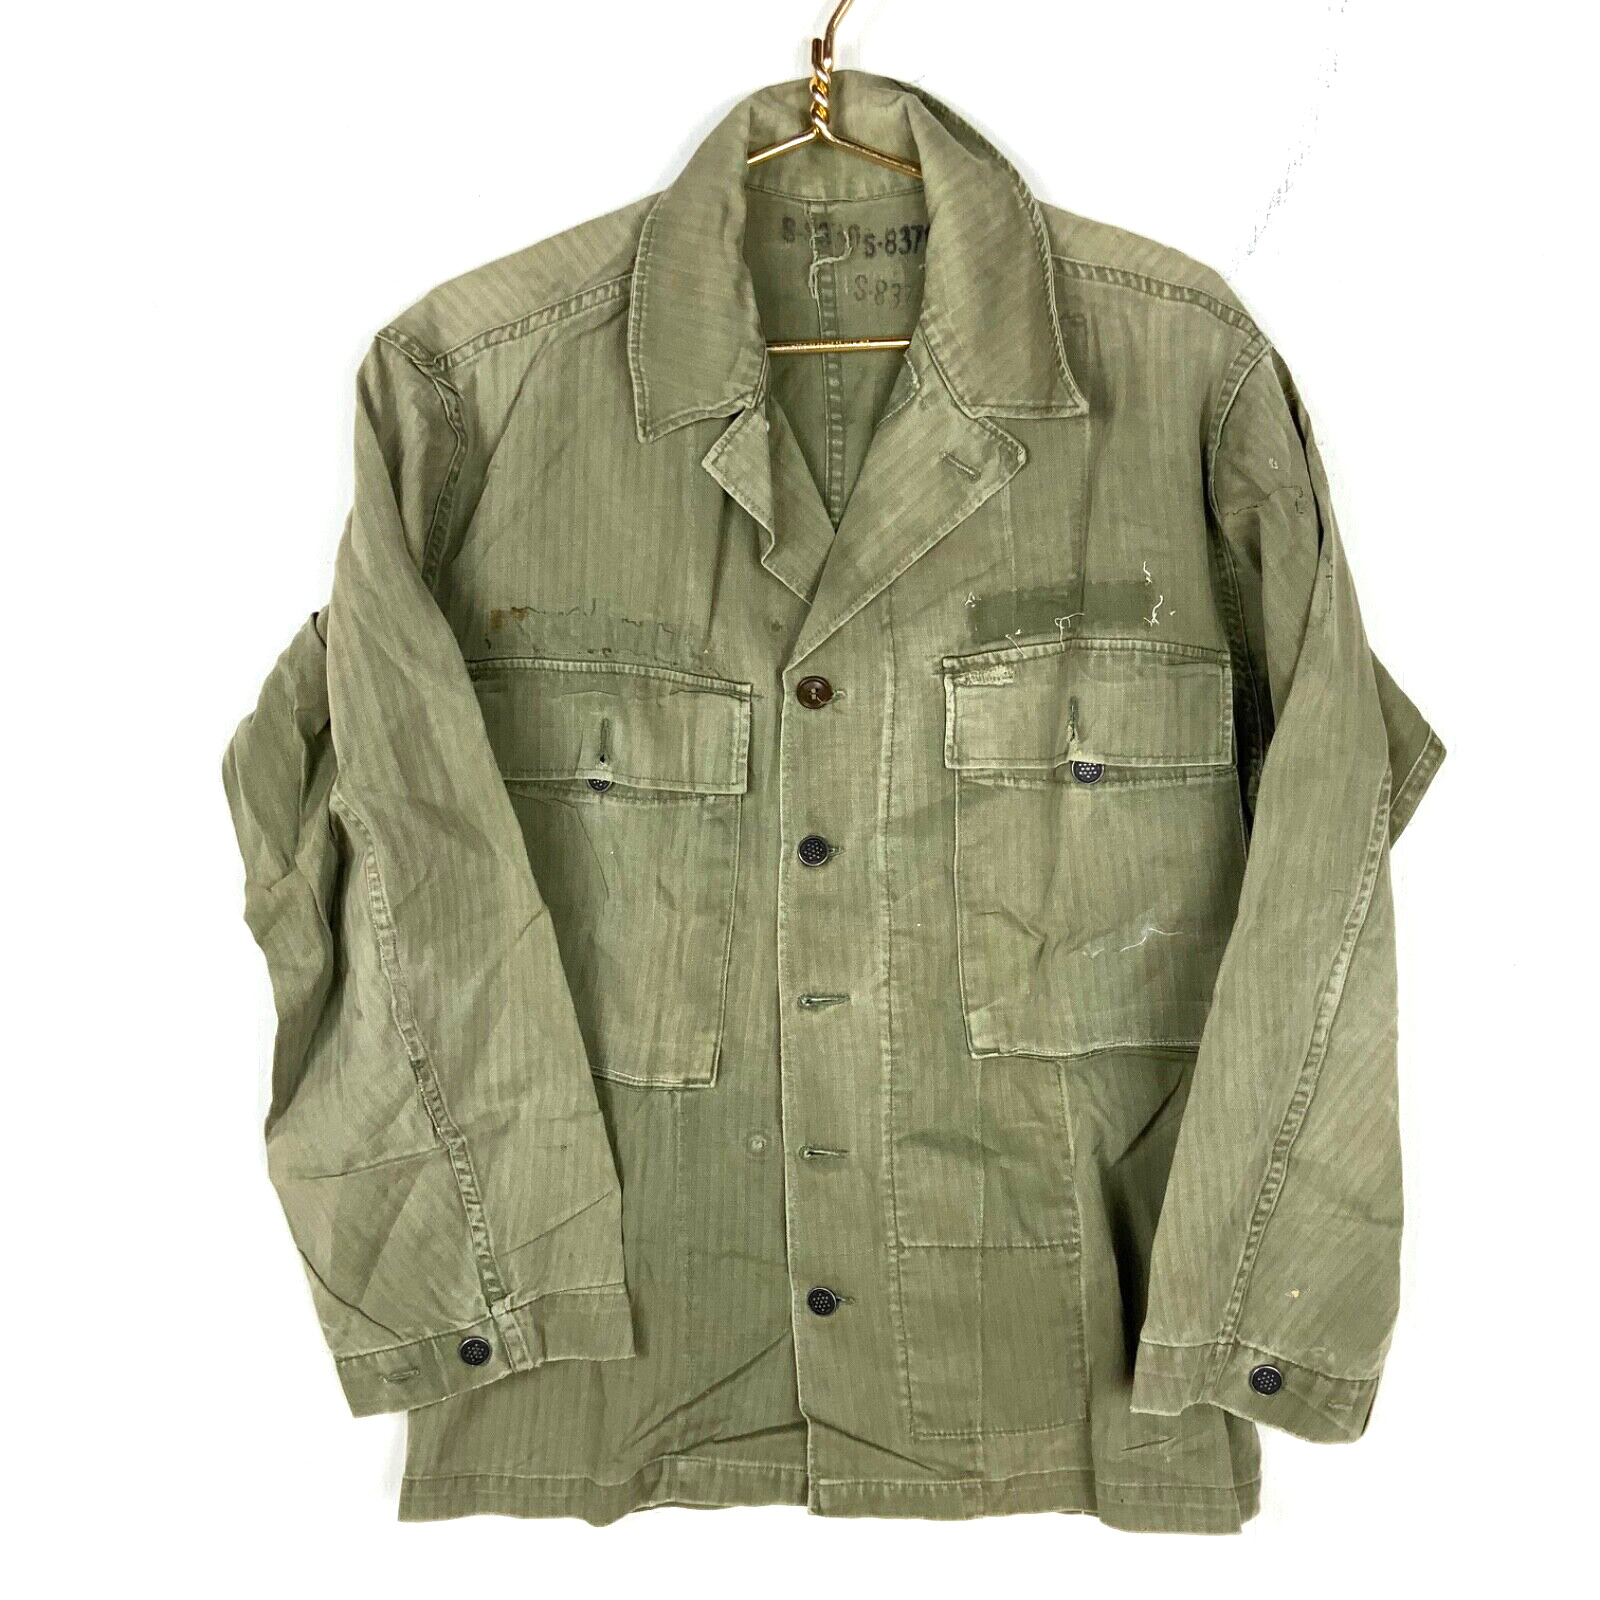 Vintage Us Military 13 Star Hbt Fatigue Shirt Jacket Size Small Green 40s 50s